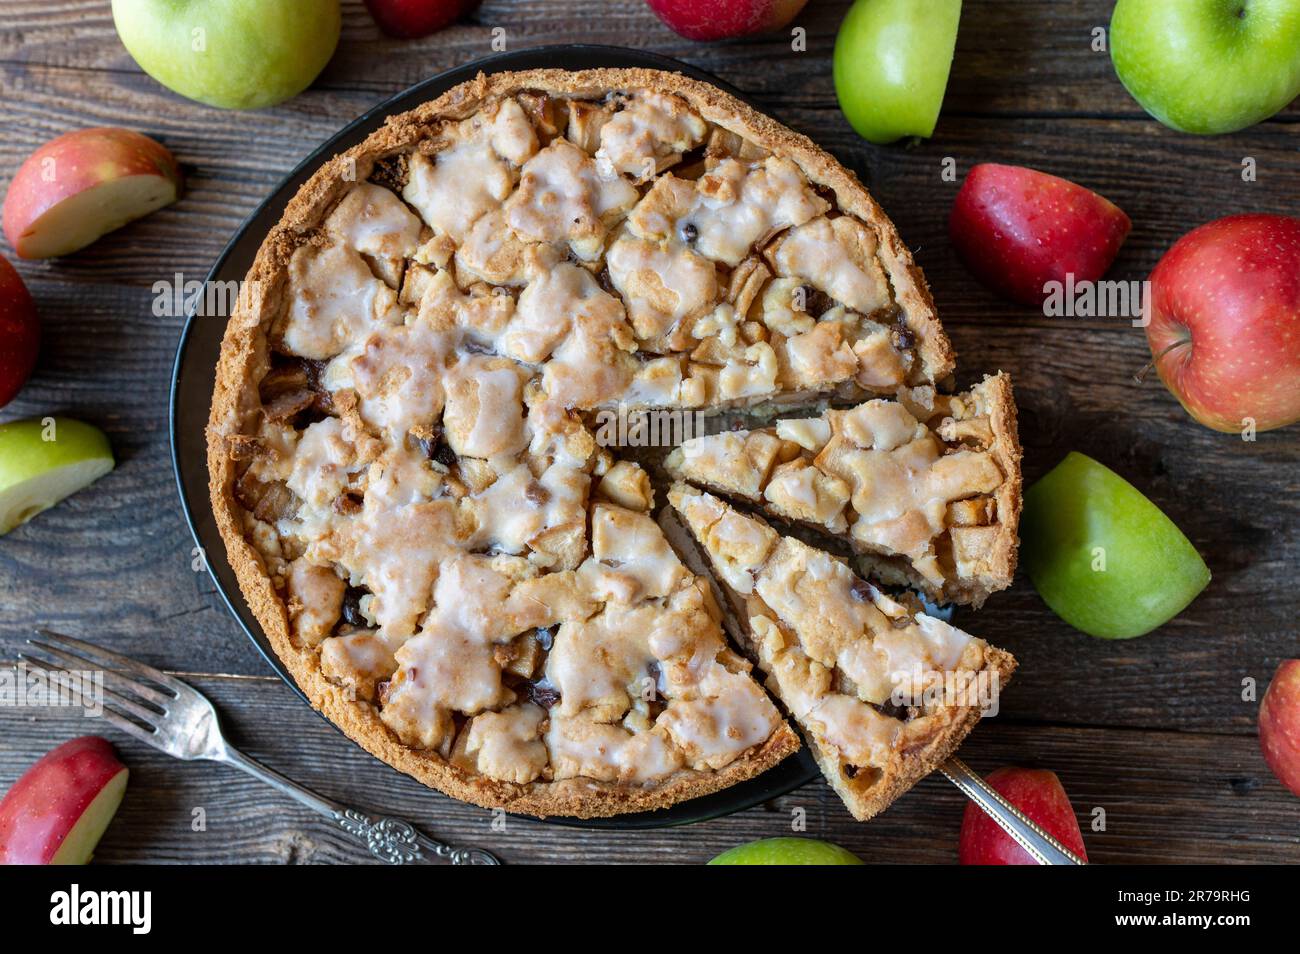 Whole and round apple pie baked with short crust pastry, precooked apples, cinnamon and raisins. Topped with a delicious lemon glaze Stock Photo